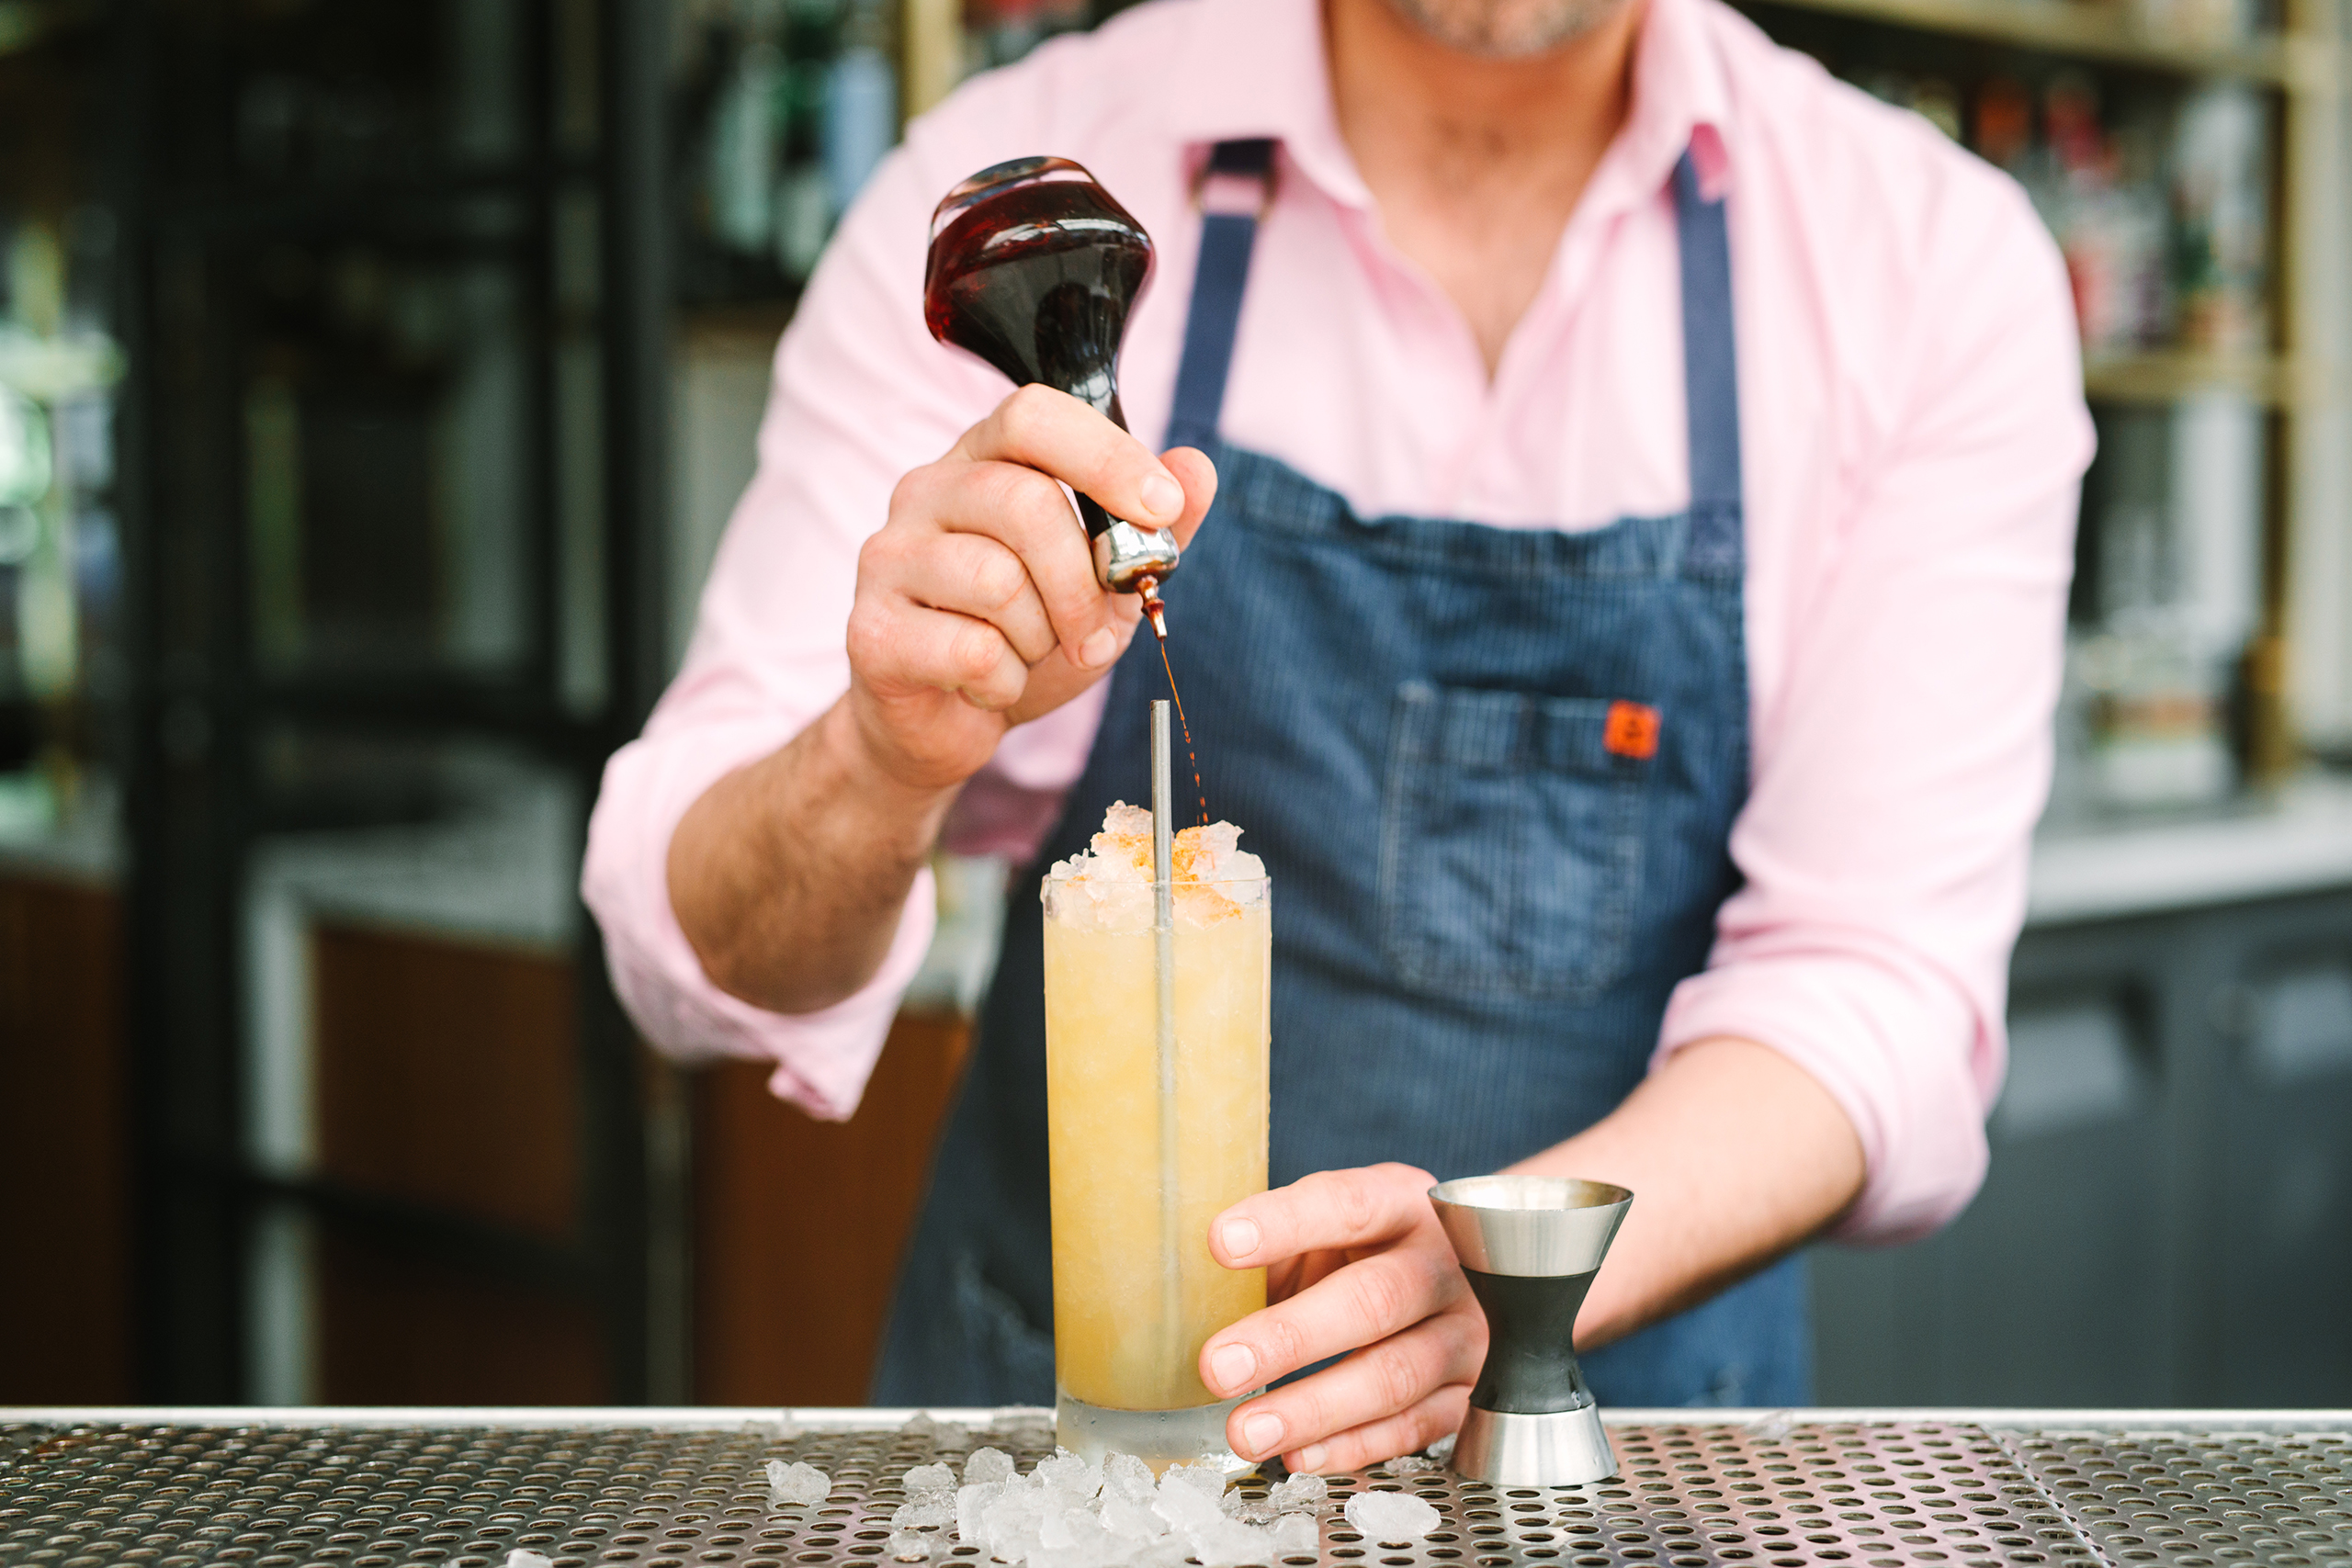 bartender making yellow cocktail with blue apron and pink shirt